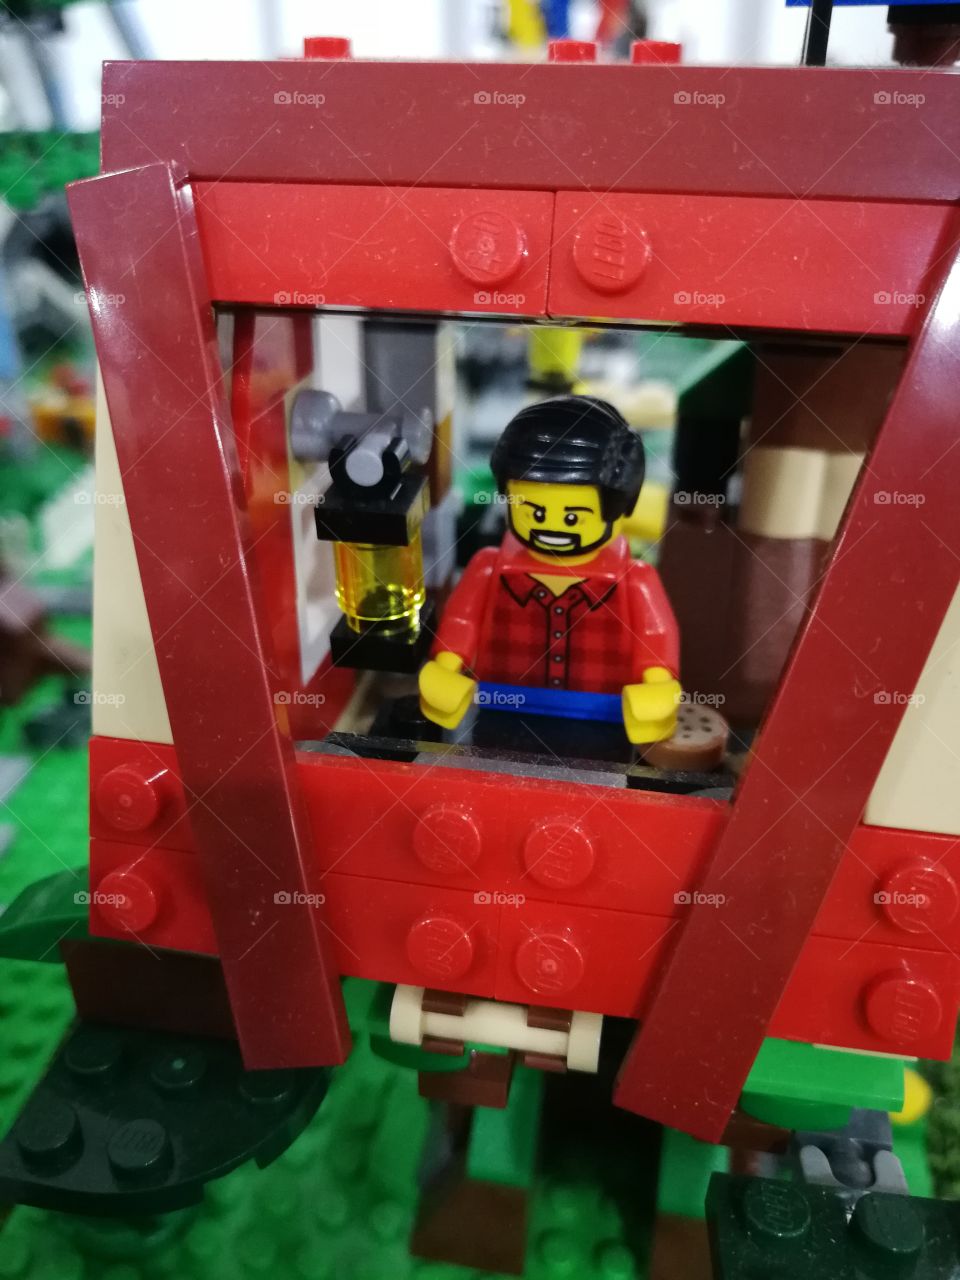 Lego minifigures are manufactured by The Lego Group.